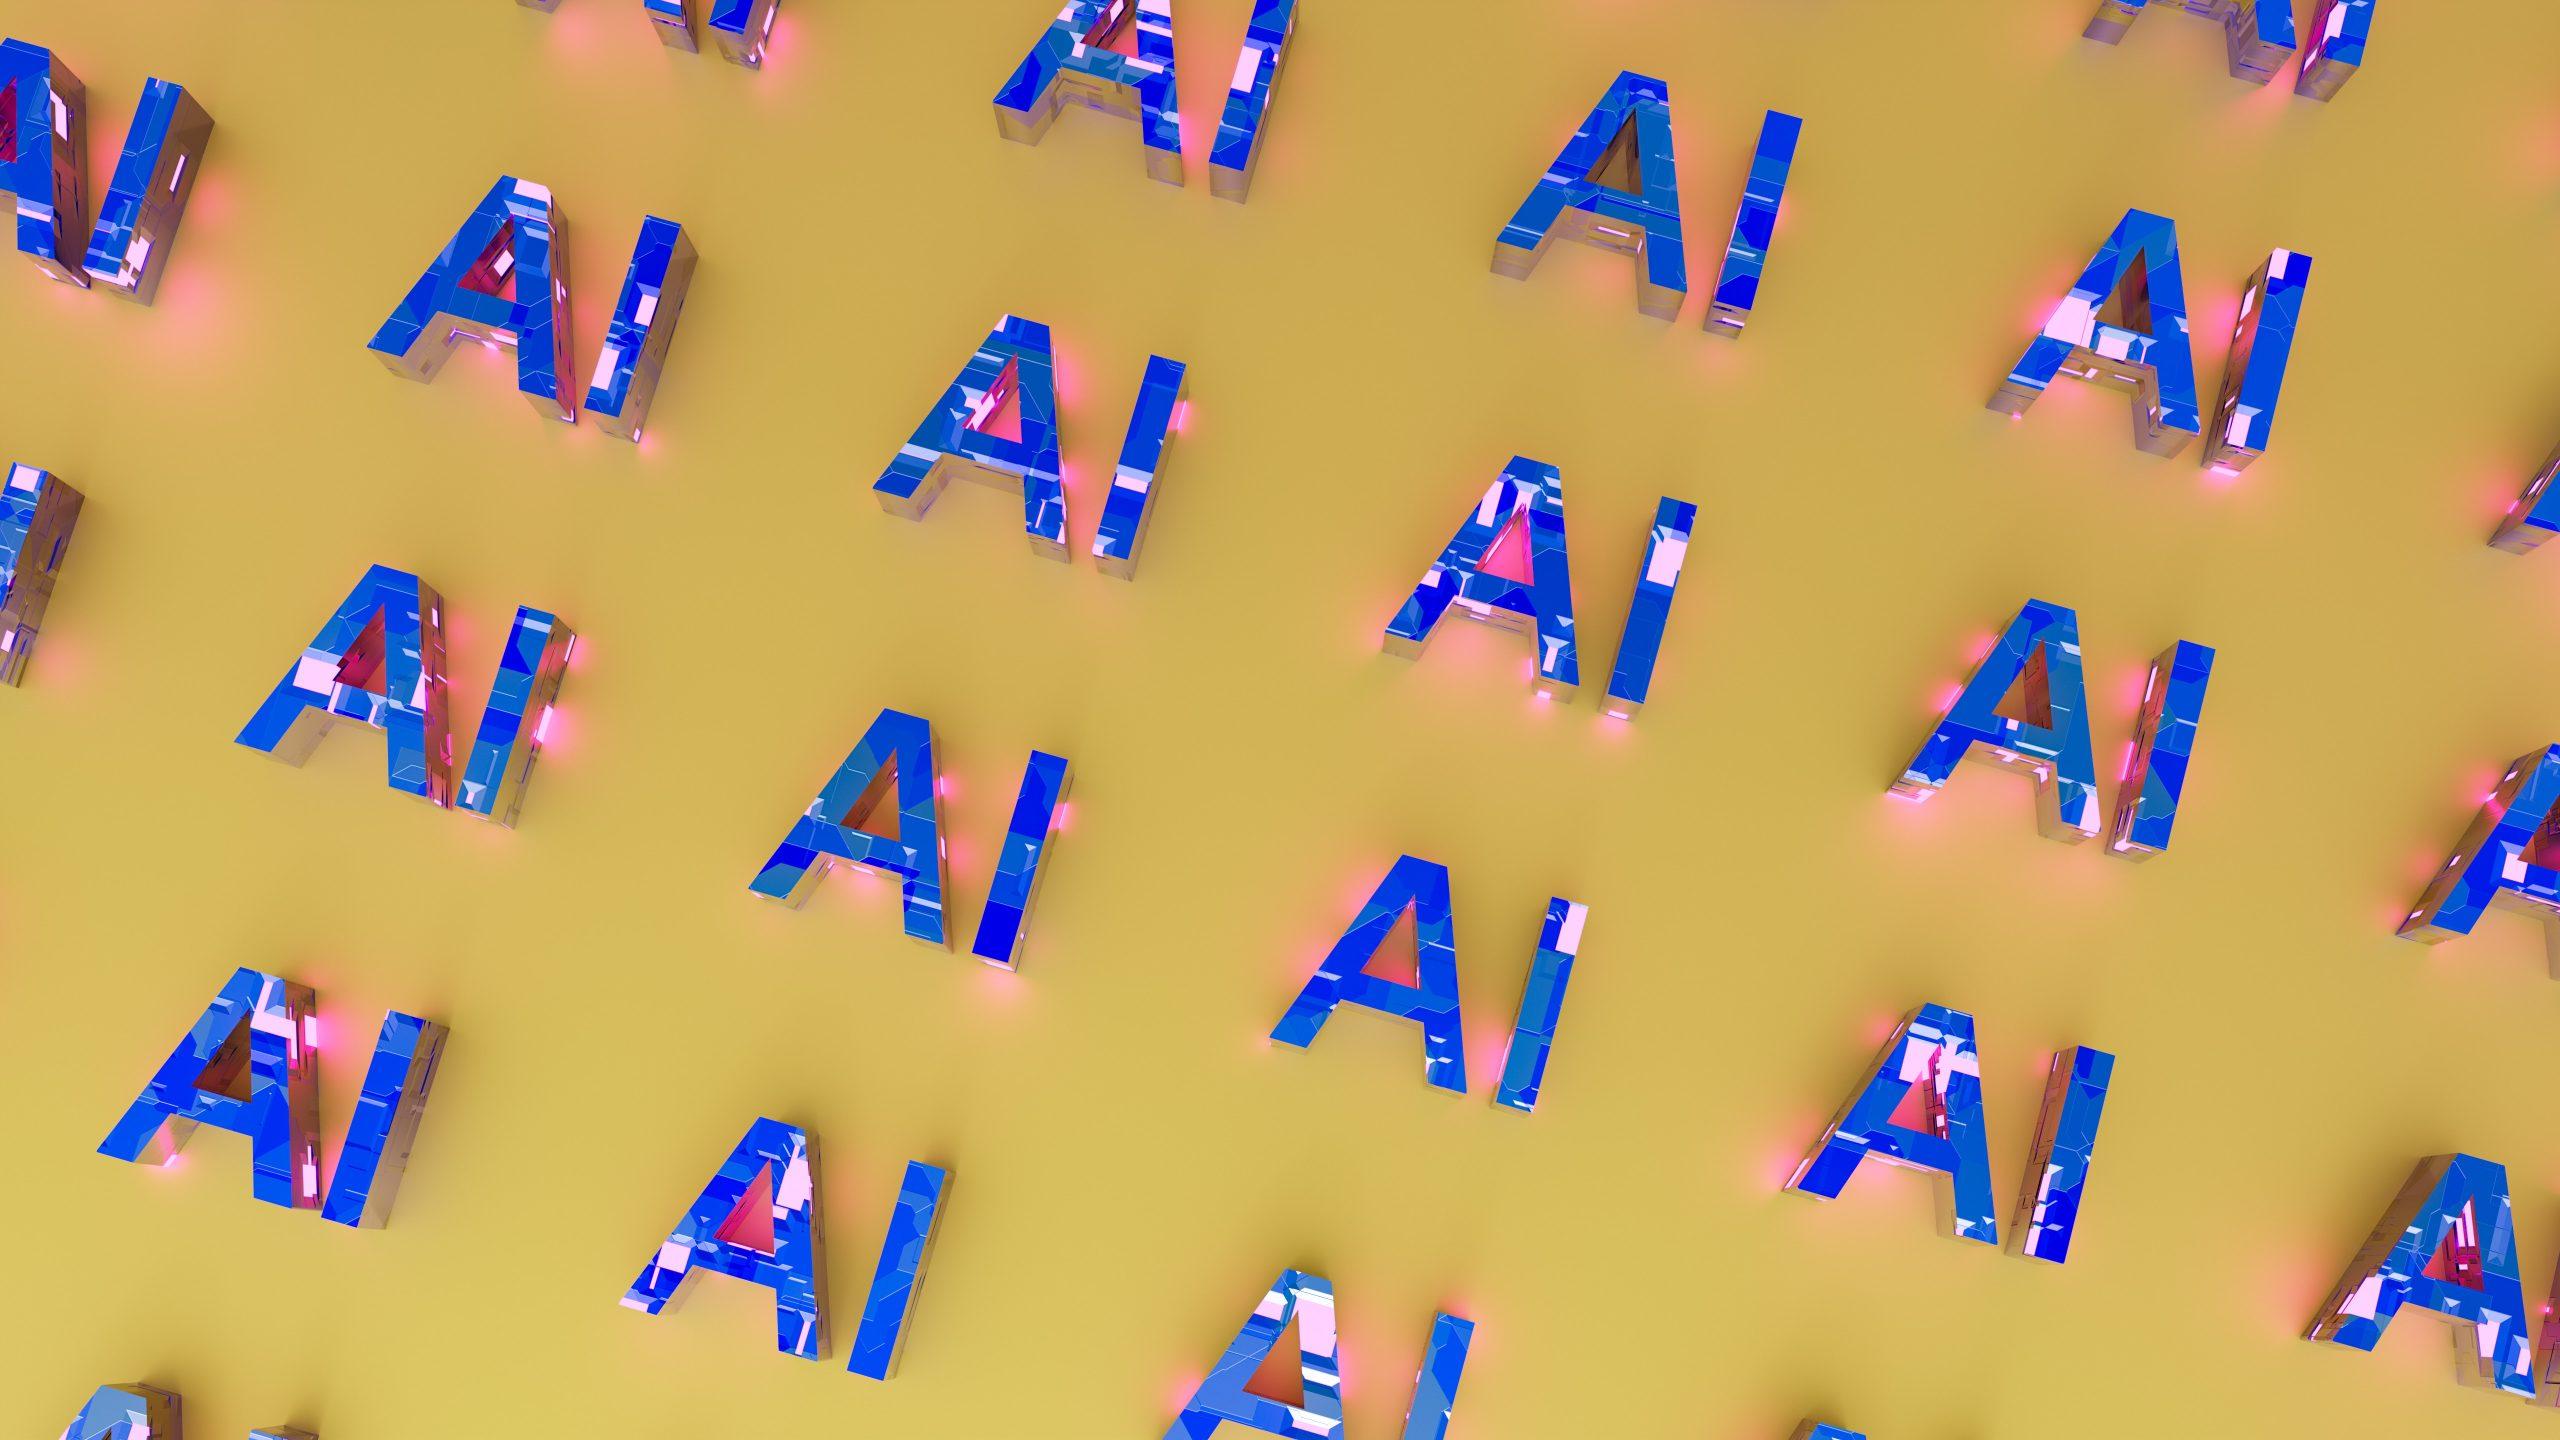 Graphic repeating the word 'AI' in blue letters against a yellow backdrop.